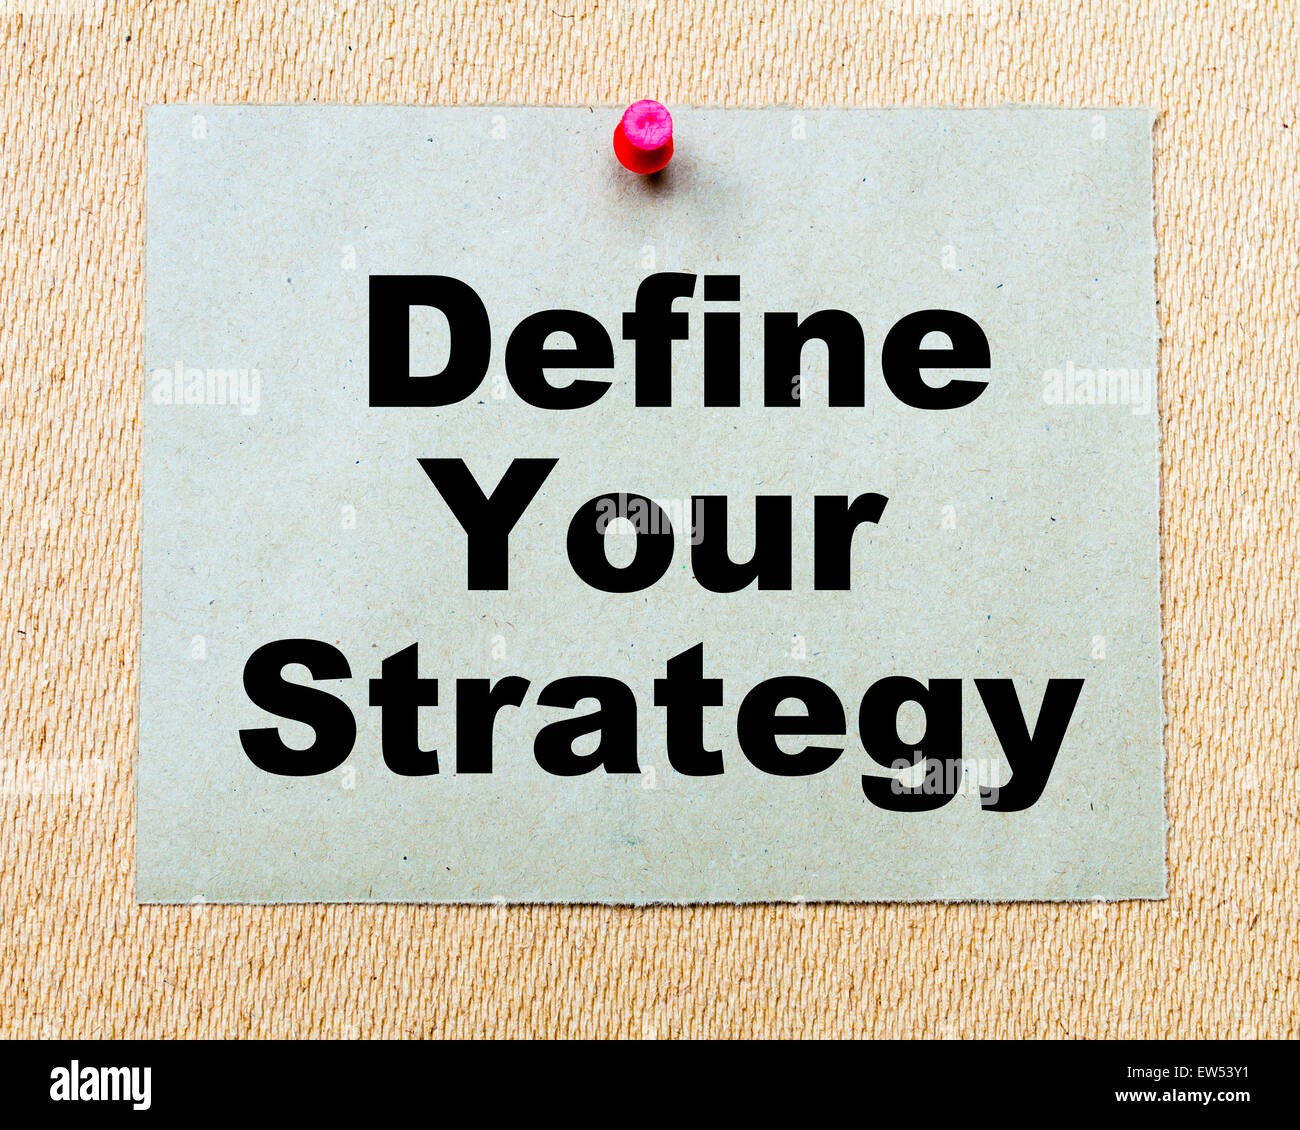 Define Your Strategy  written on paper note pinned with red thumbtack on wooden board. Business conceptual Image Stock Photo